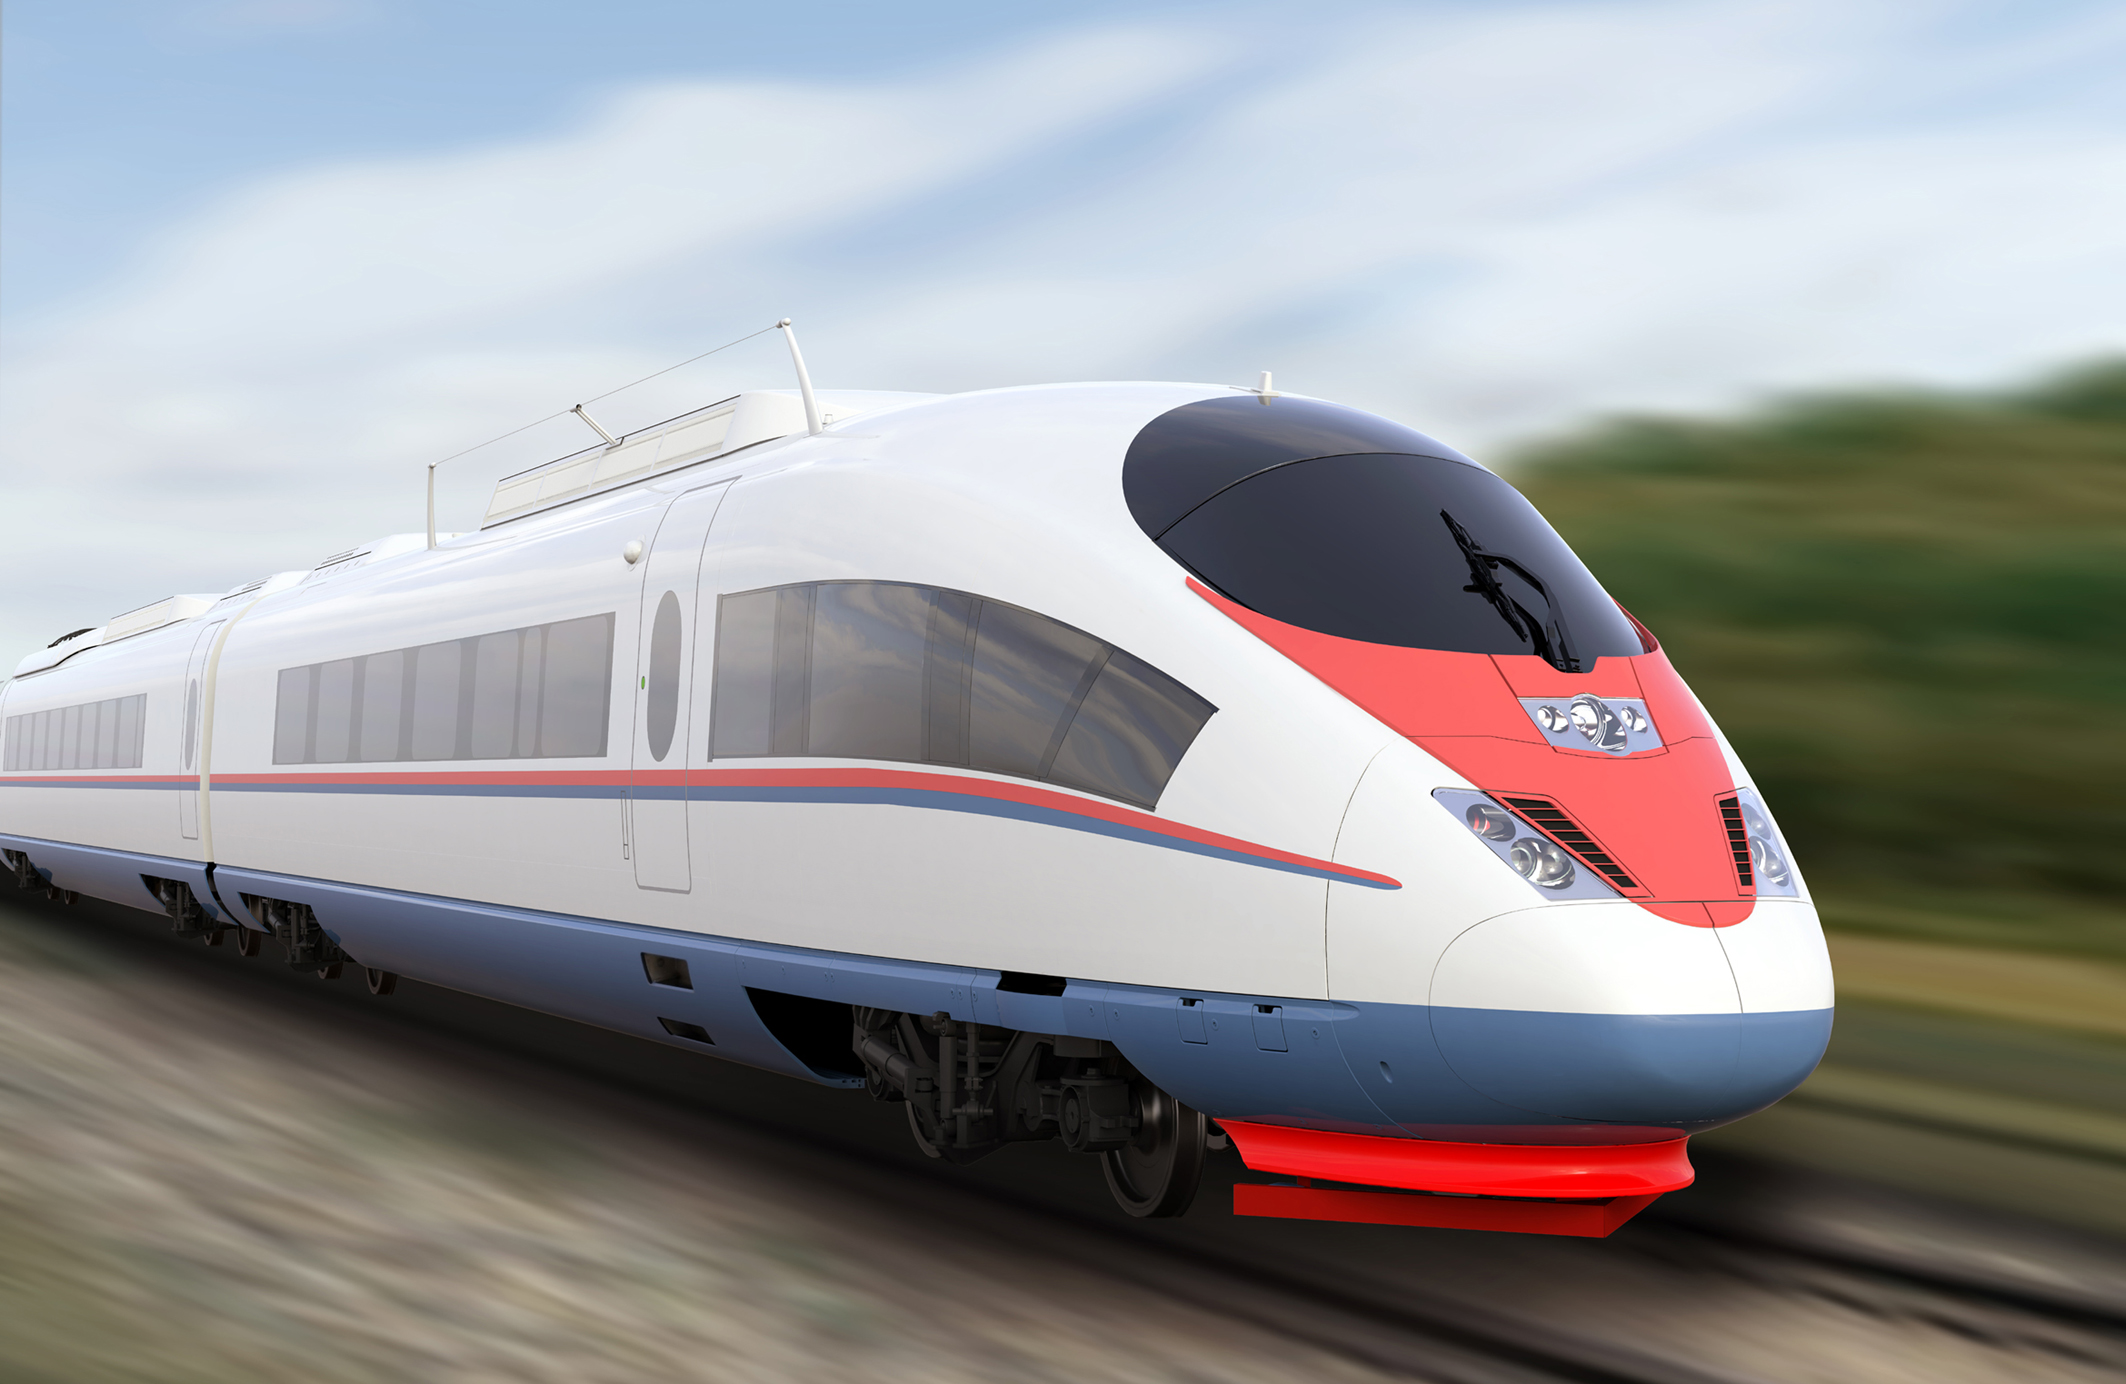 Panama Studies Cross-Country, High Speed Train to Connect Major Cities